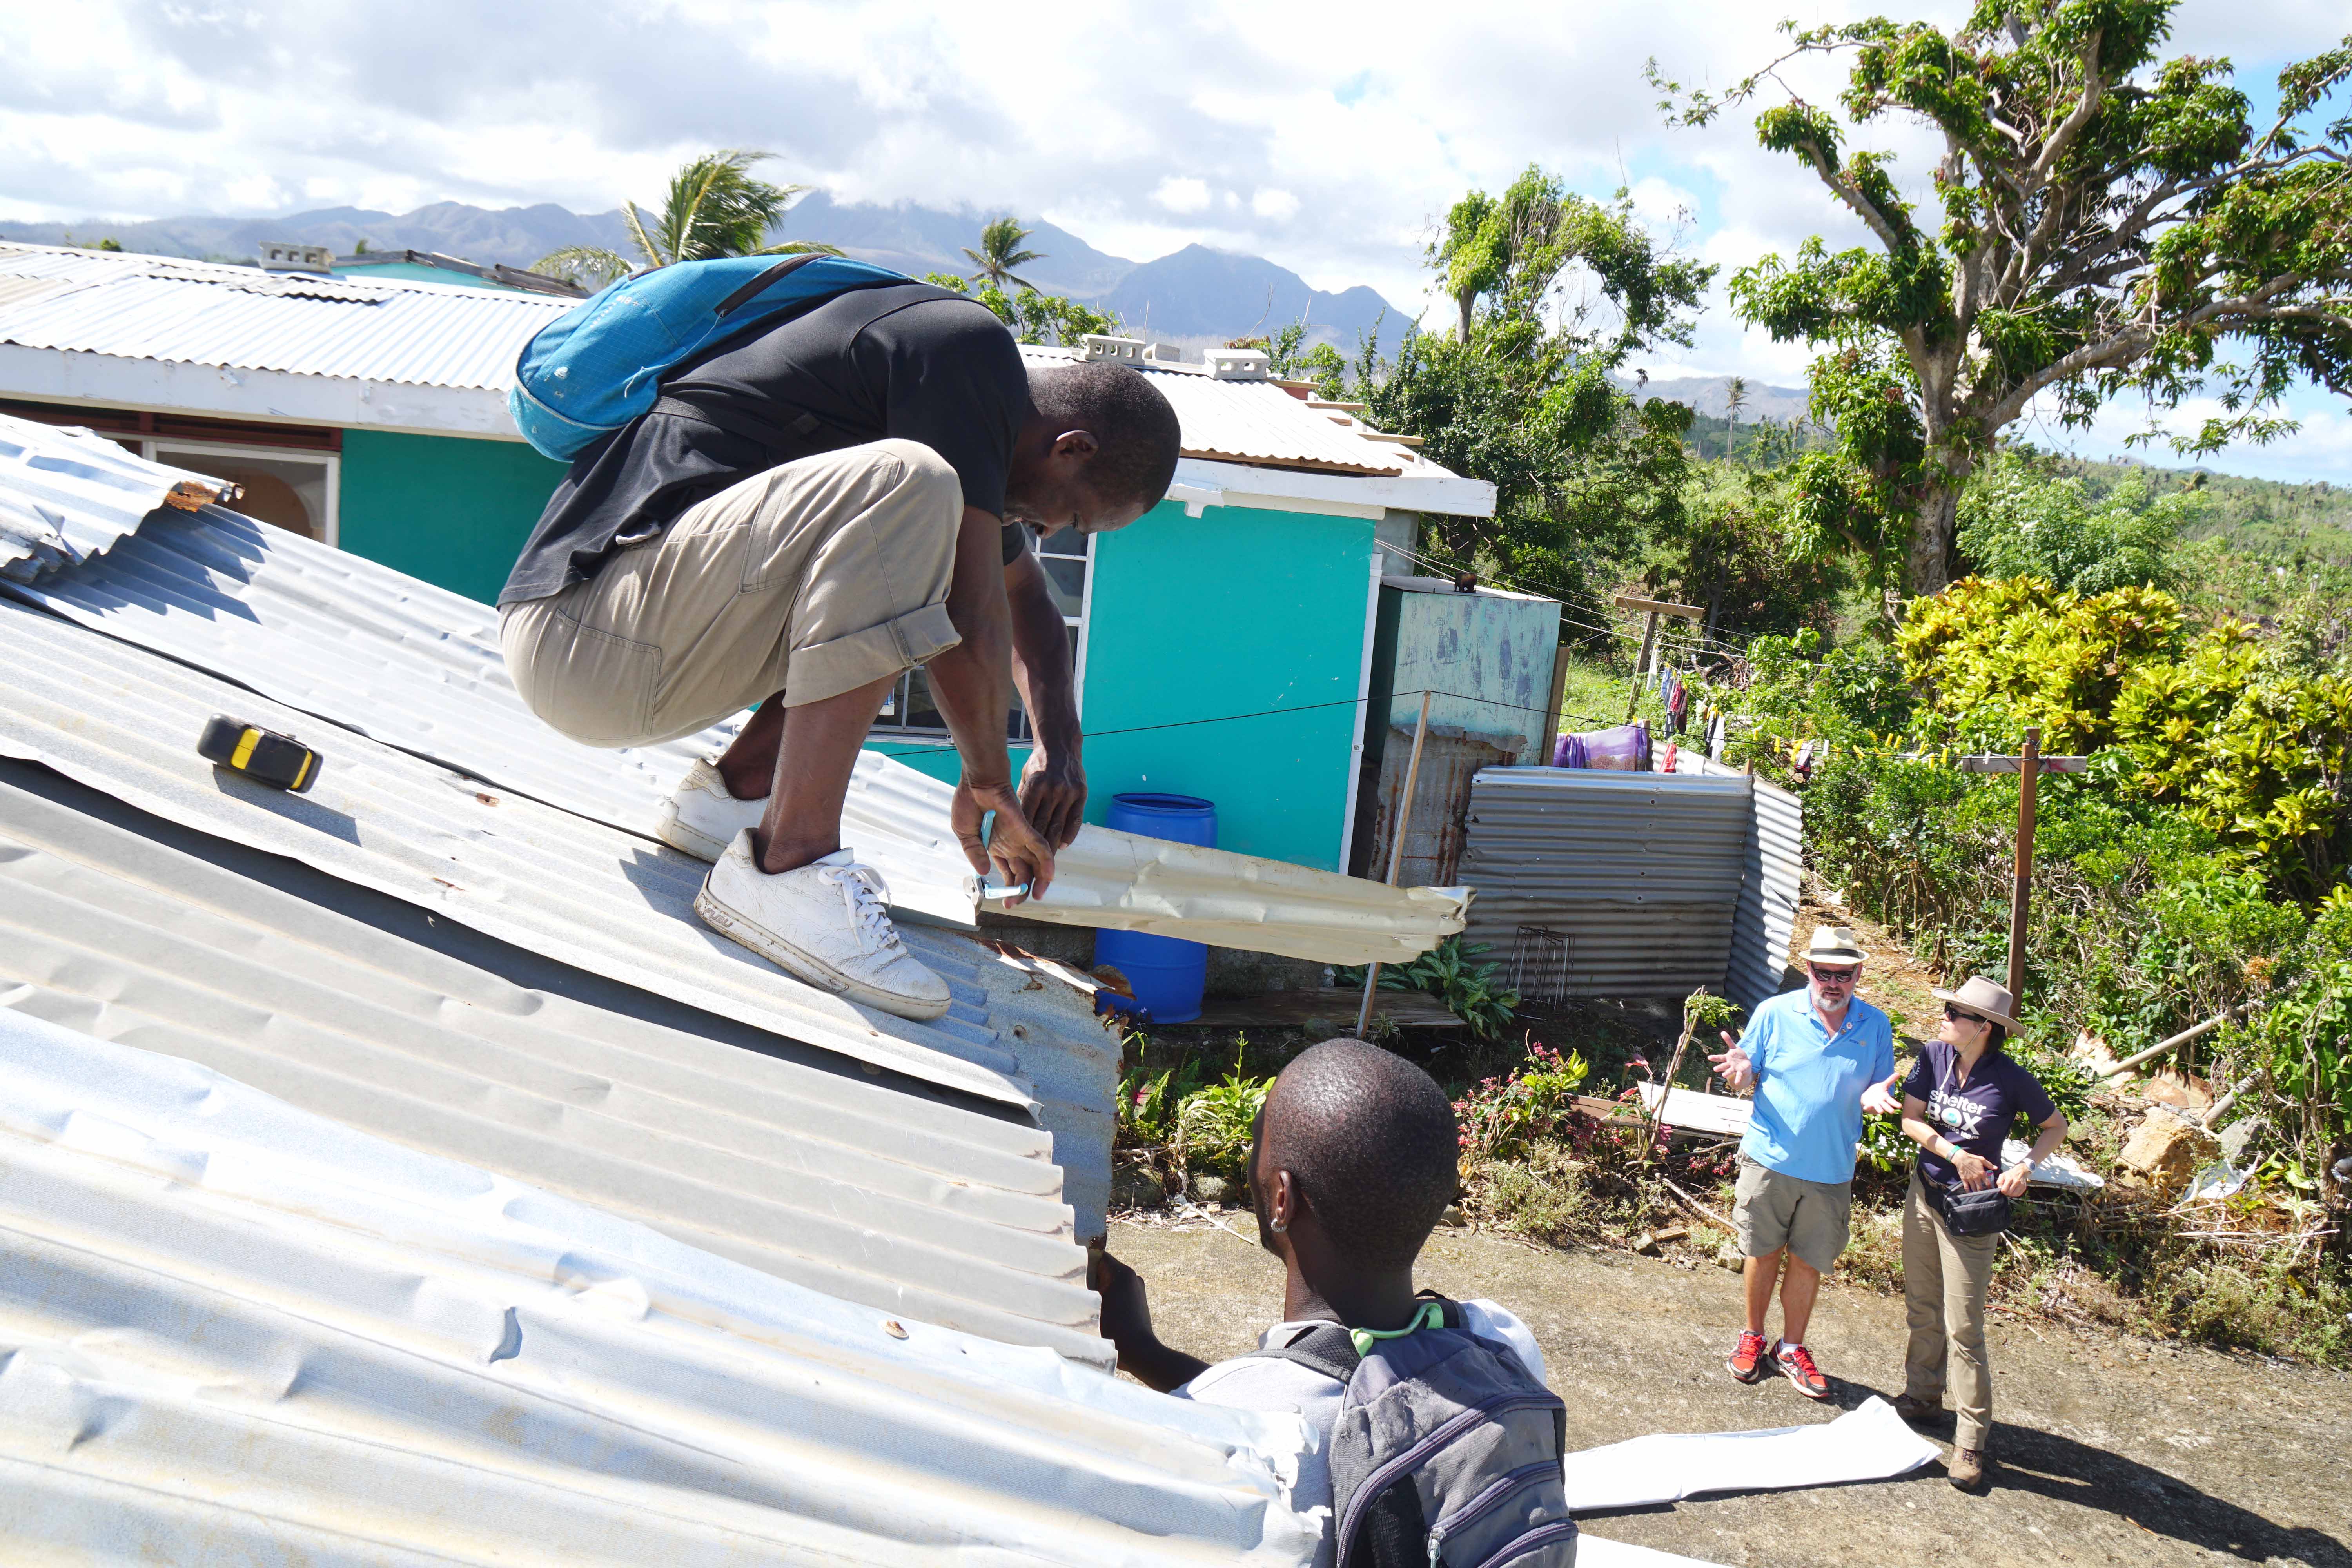 ShelterBox global impact providing aid in Dominica